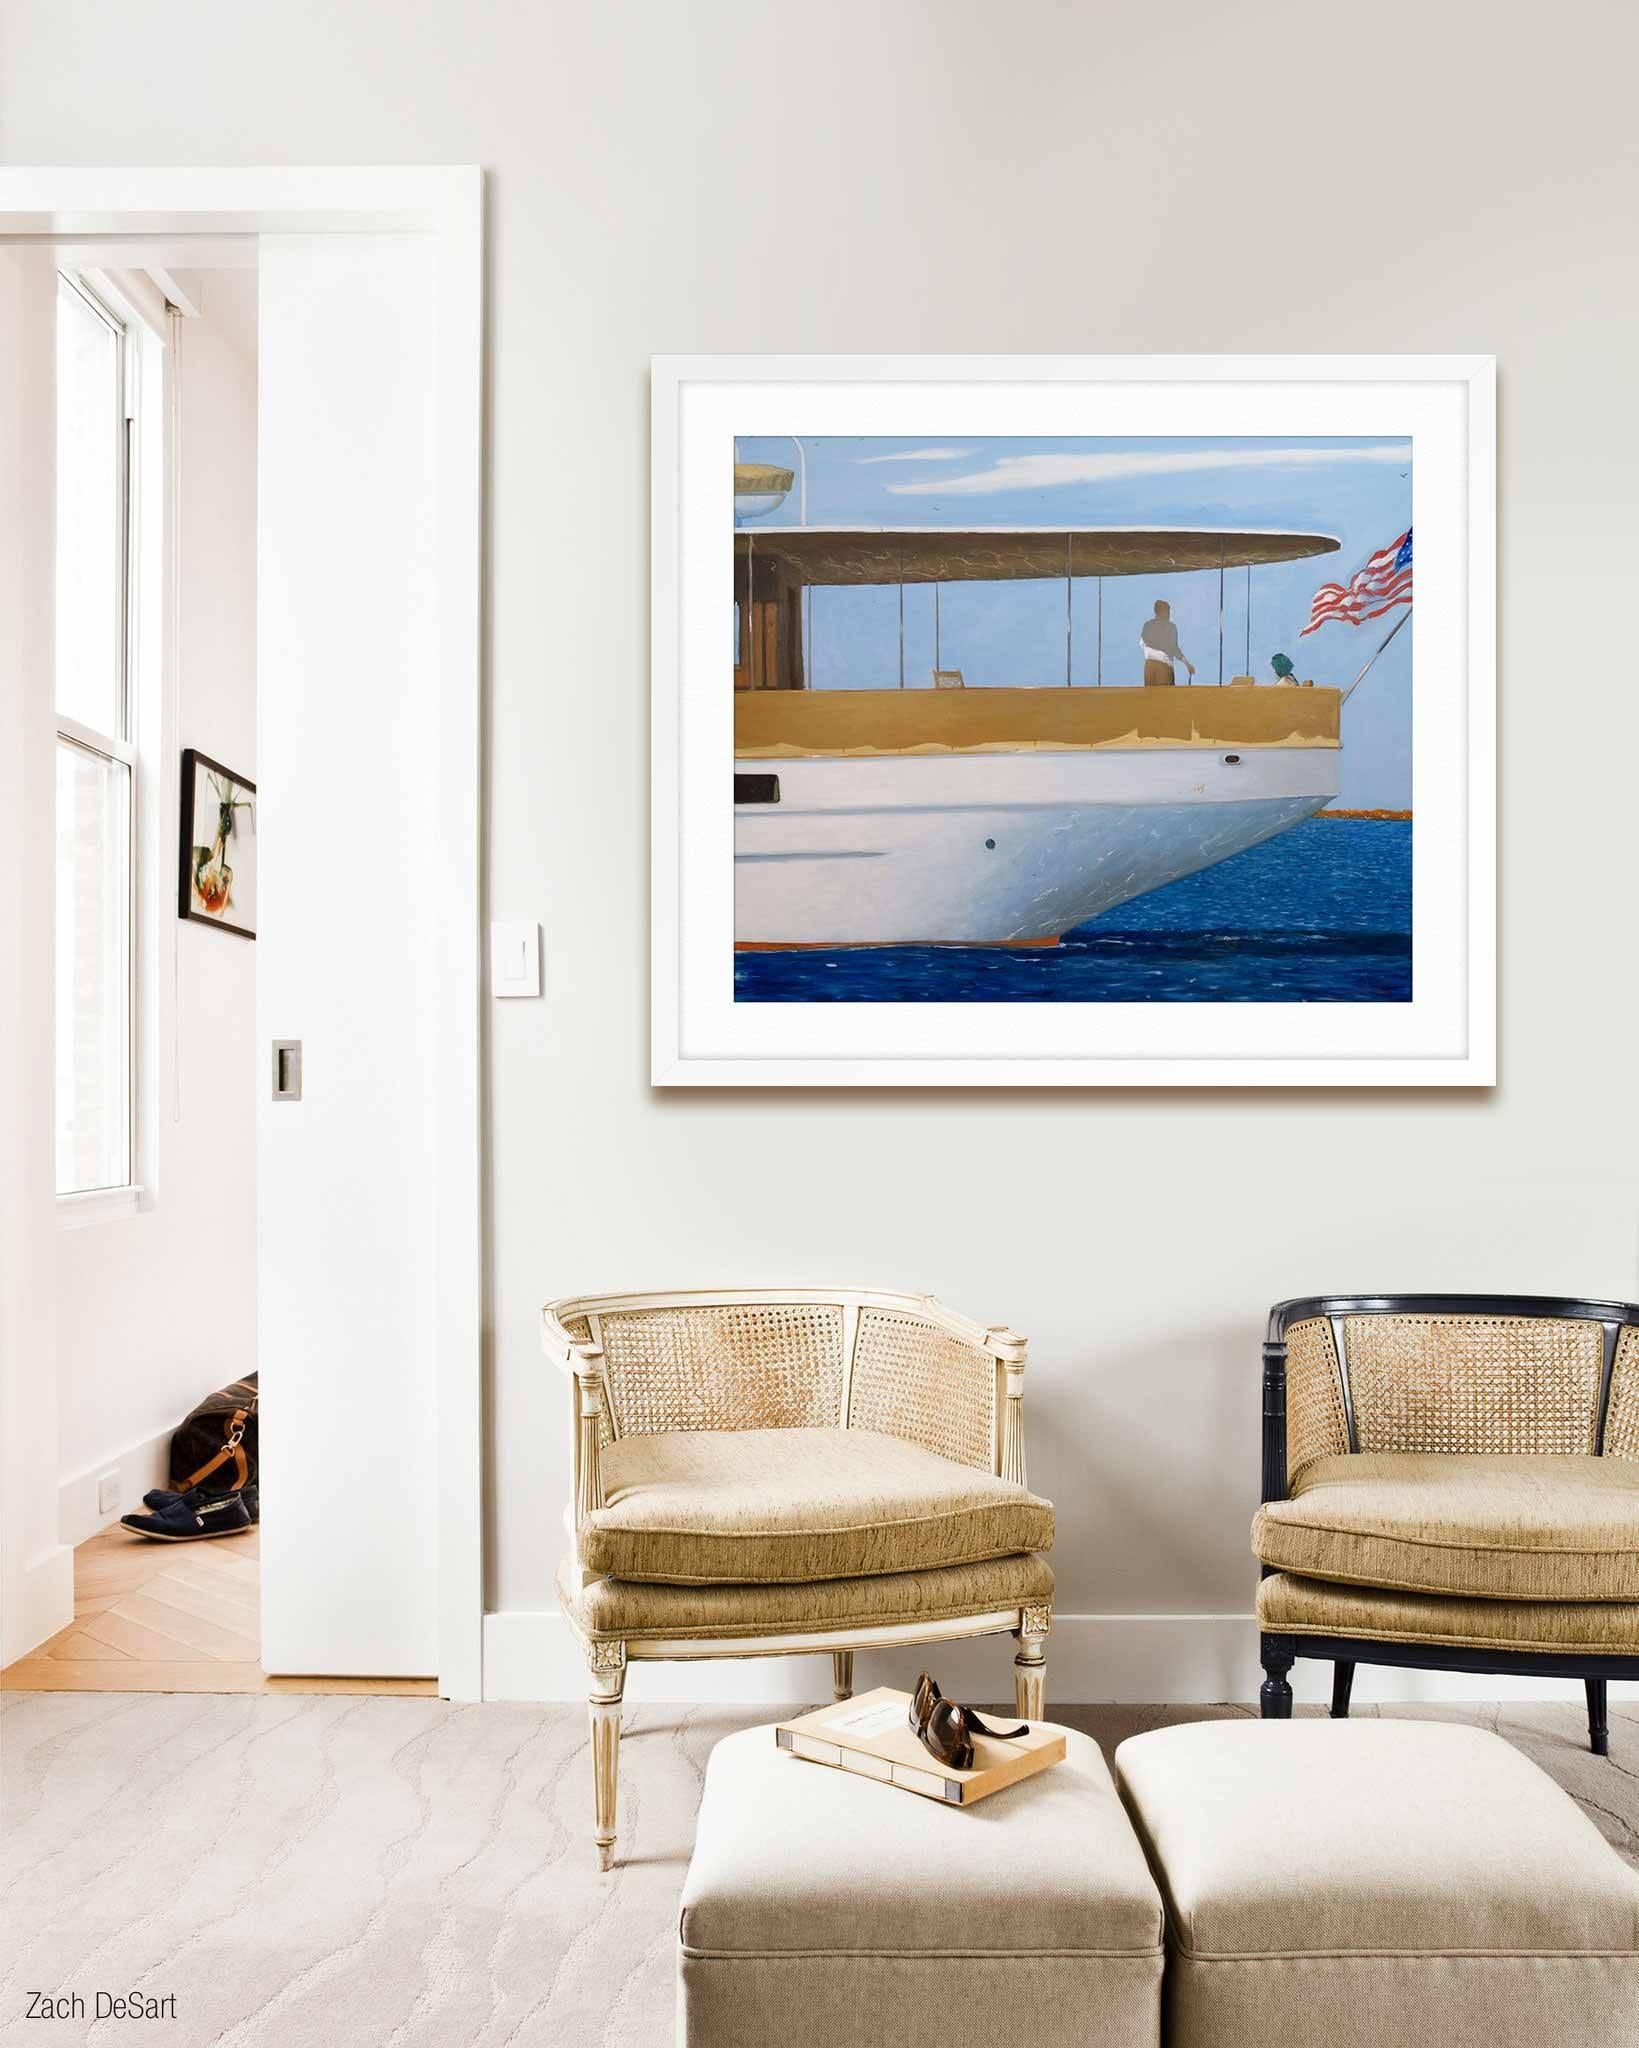 ABOUT THIS PIECE: Julio Larraz is an expert draftsman, adroitly sketching his subjects and enlivening them with vibrant color. Larraz is recognized for his precise and detailed technique, his imagination, and his subtle touch.  

ABOUT THIS ARTIST: